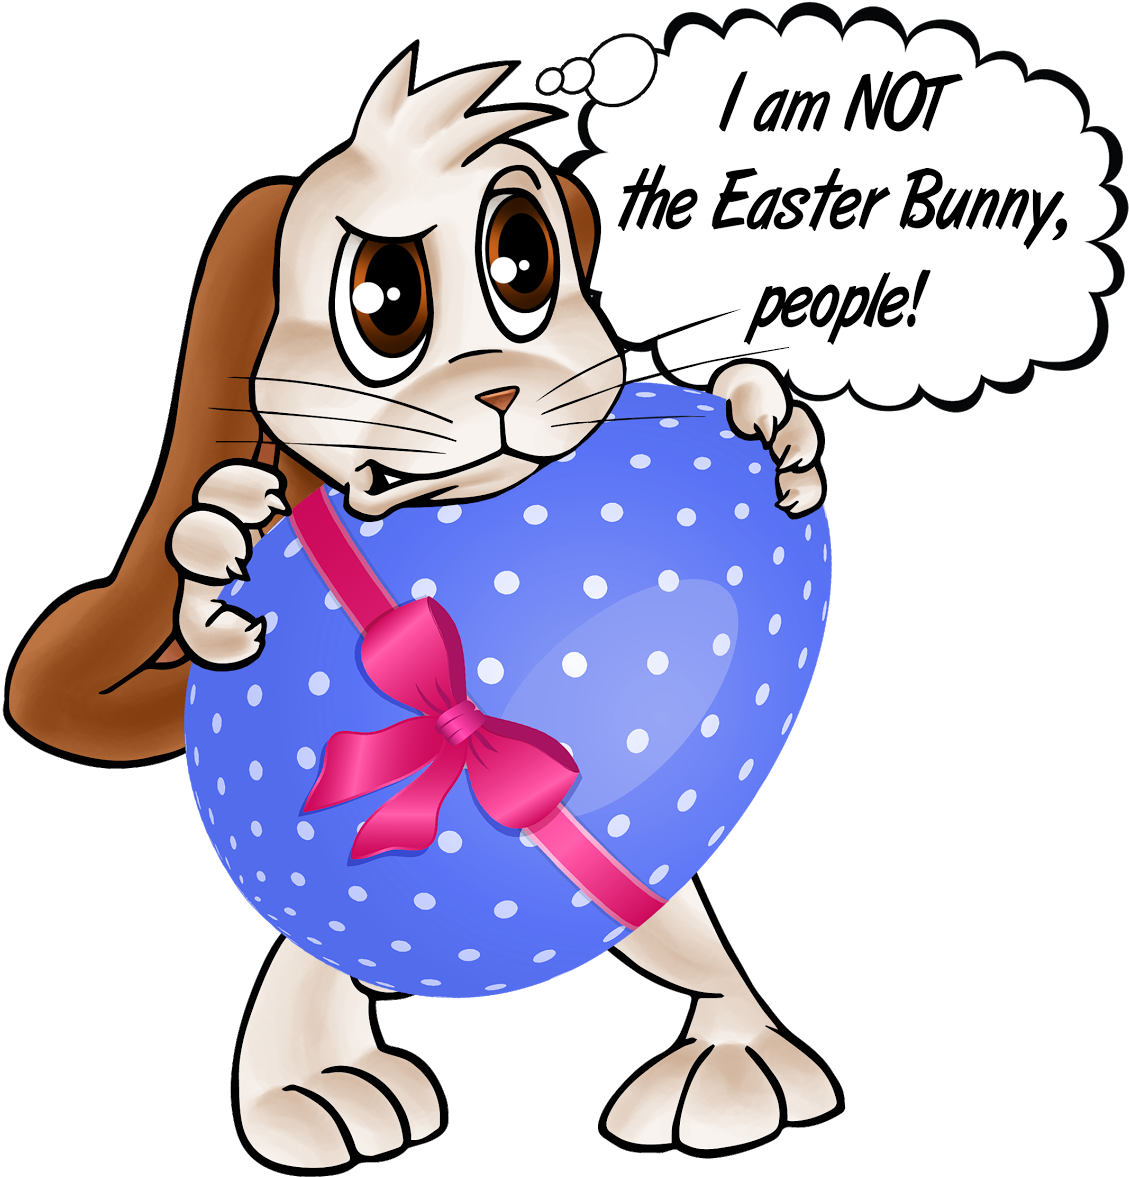 He Is Not The Easter Bunny That Means, Not Cuddly, - He Is Not The Easter Bunny That Means, Not Cuddly, (1275x1600)